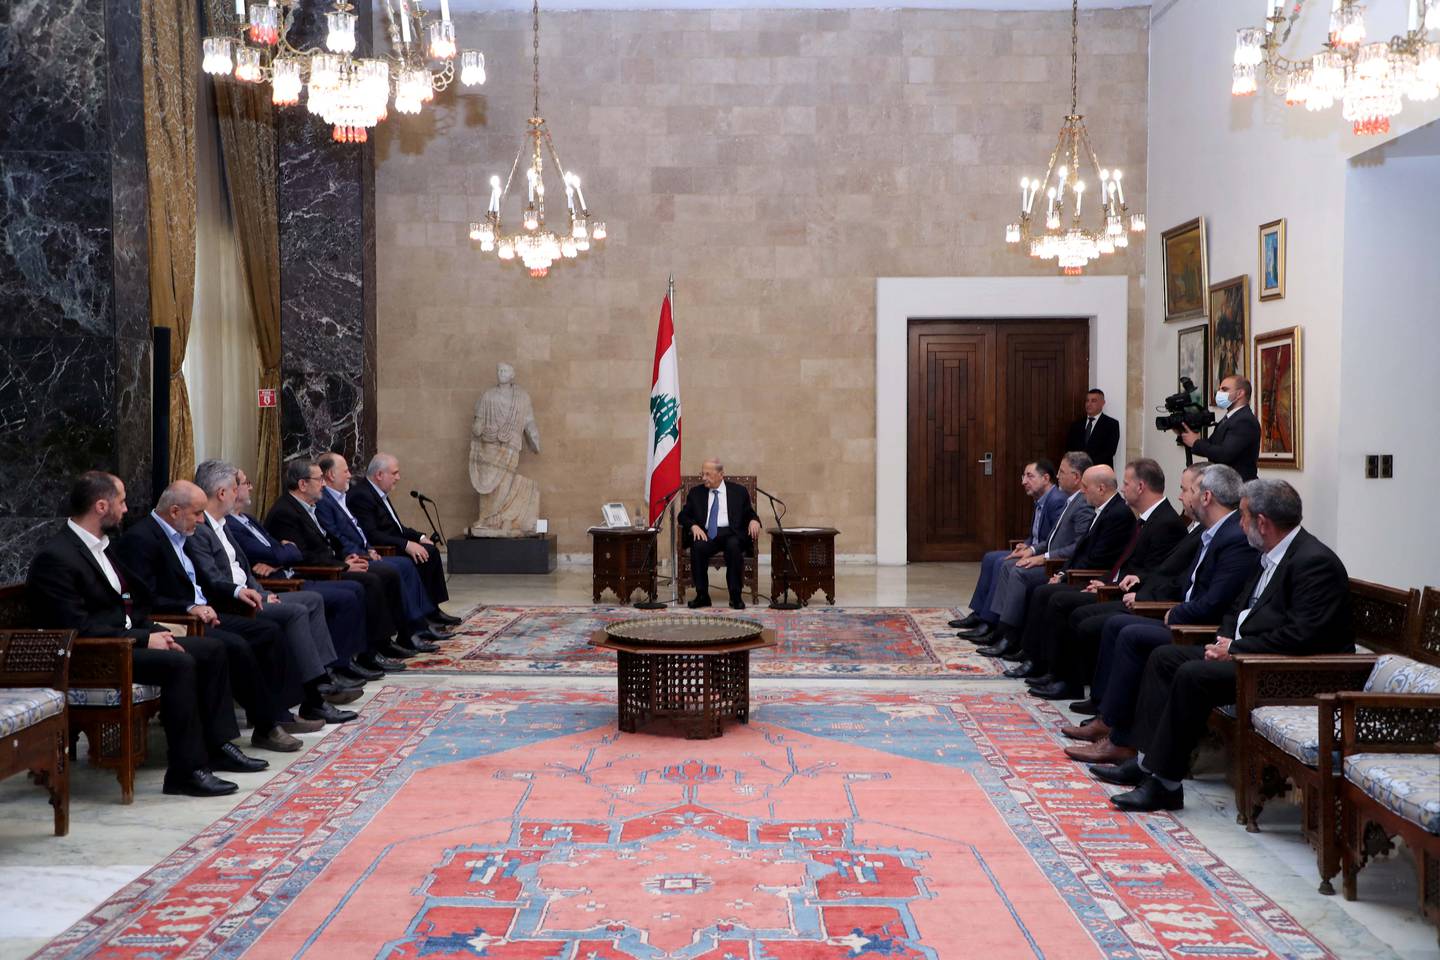 President Michel Aoun holds talks with members of Hezbollah's parliamentary bloc at the presidential palace in Baabda, Lebanon, on Thursday. Reuters